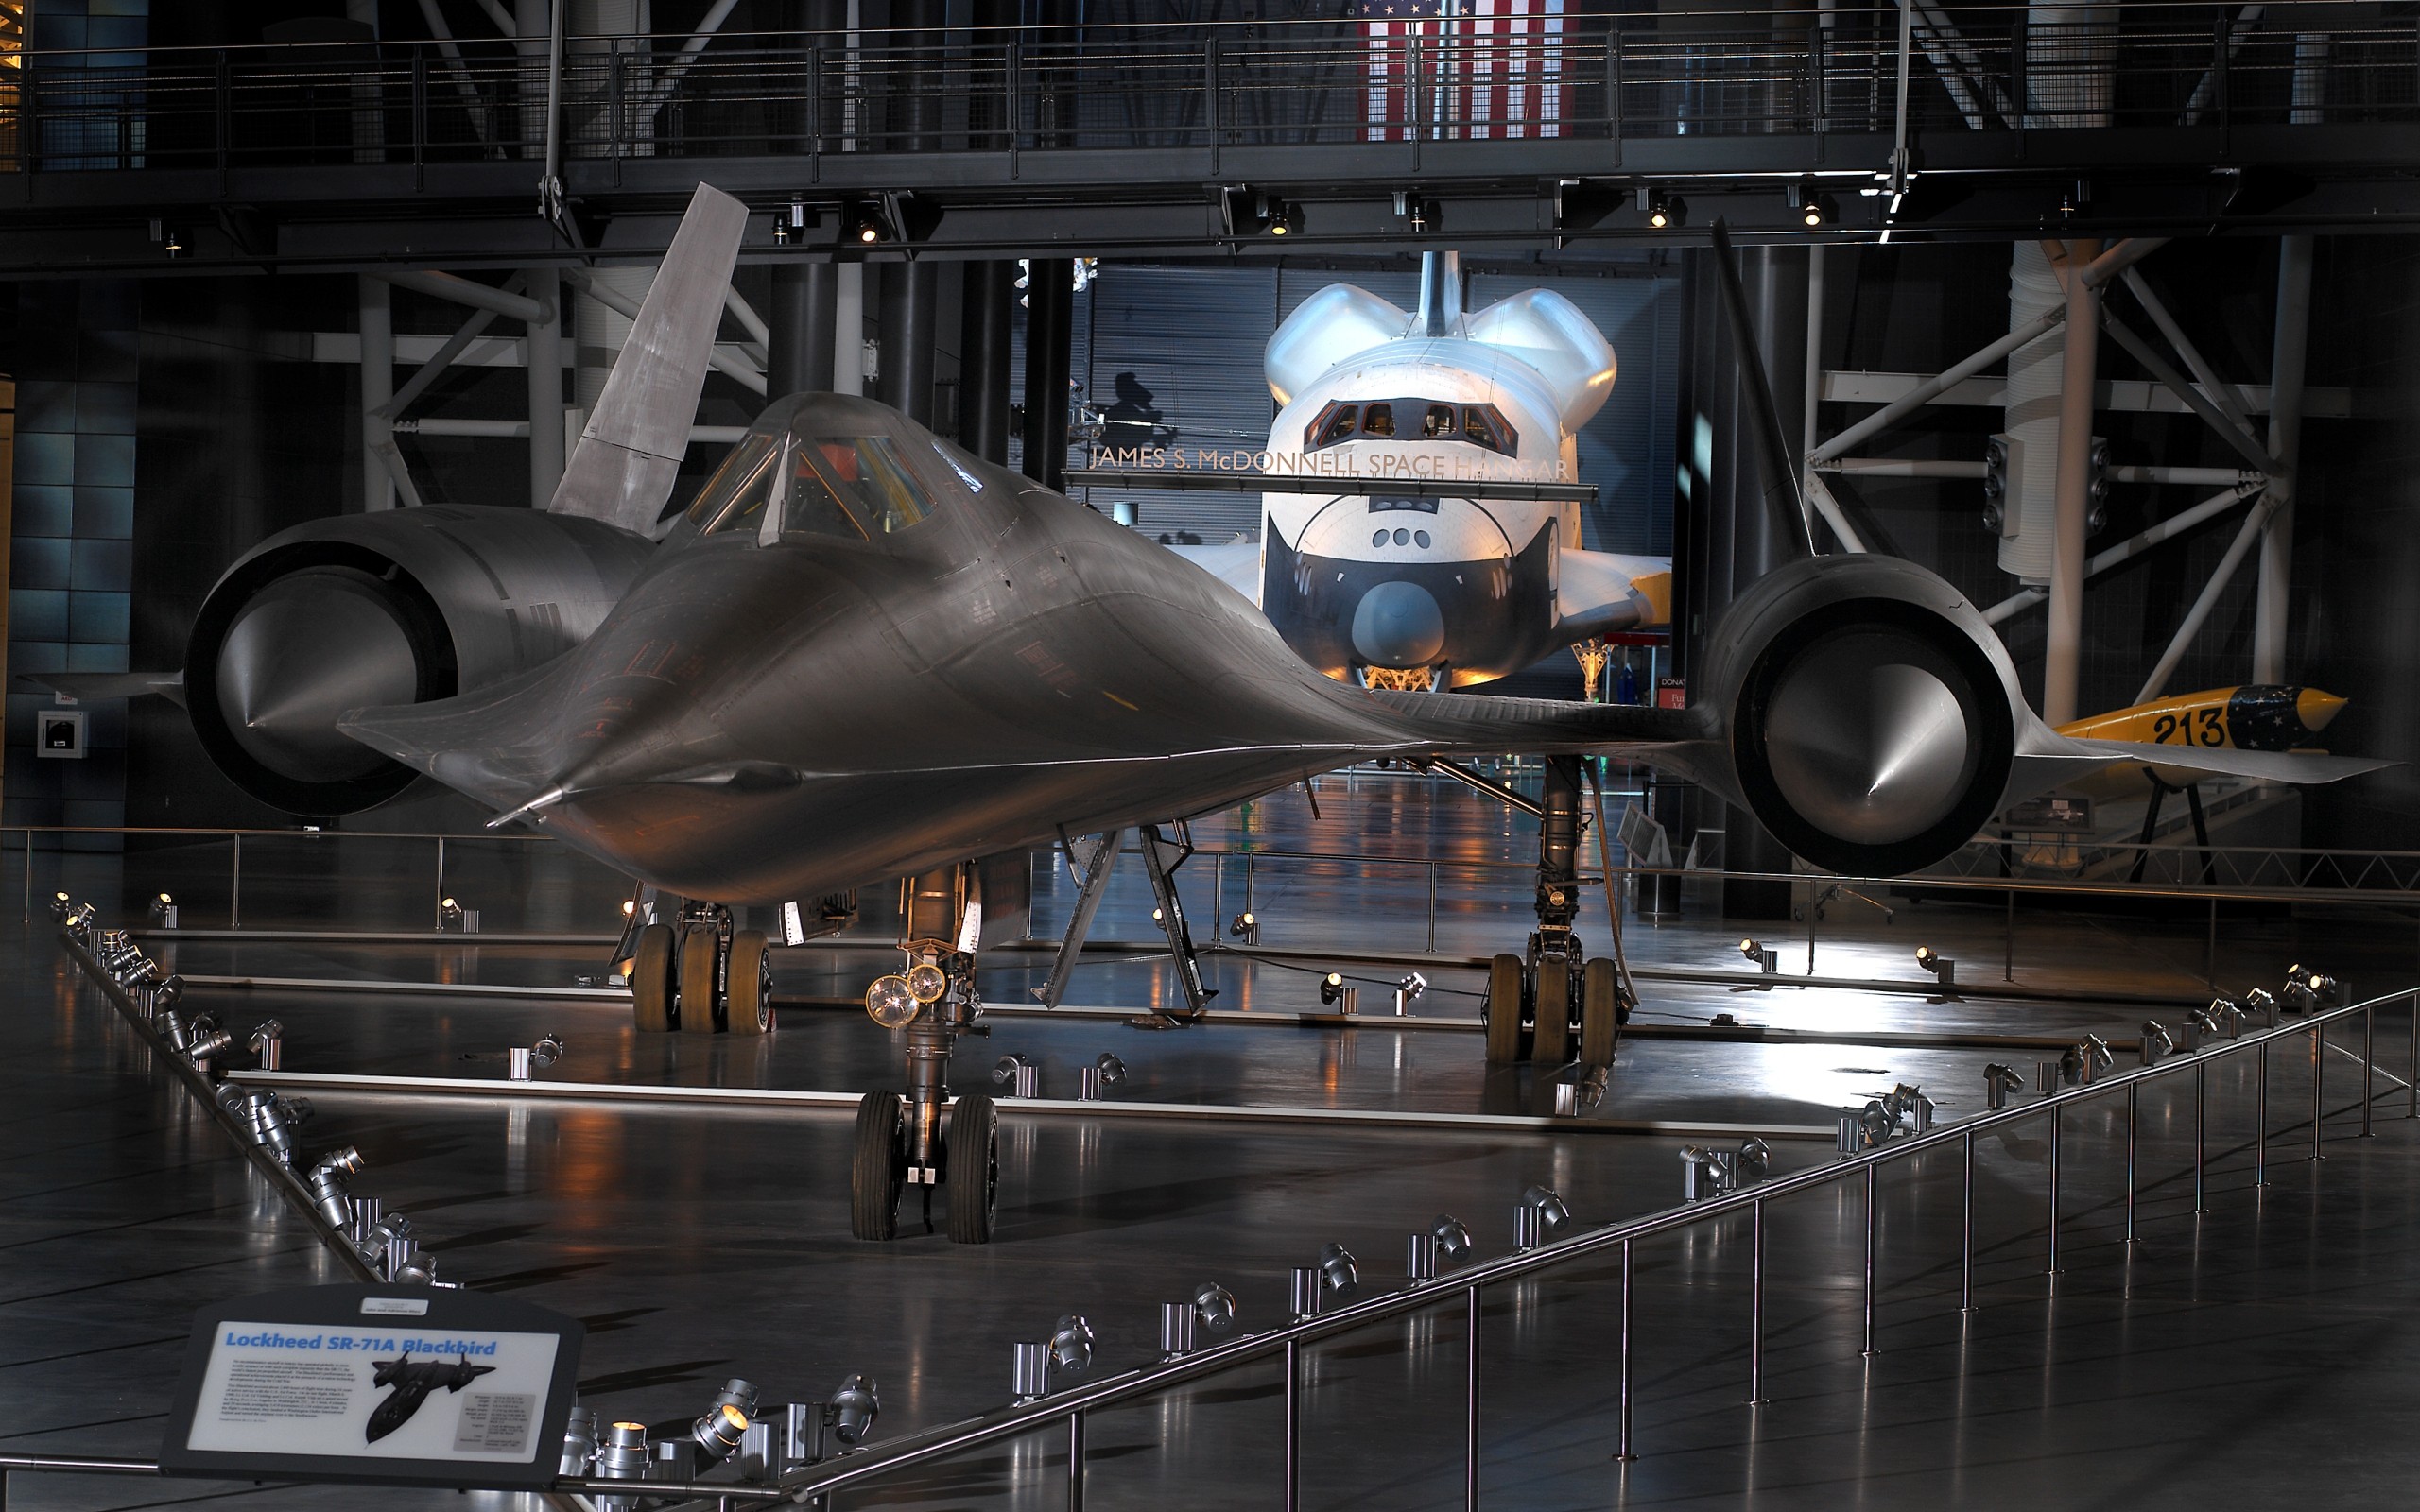 General 2560x1600 aircraft military aircraft Lockheed SR-71 Blackbird museum military vehicle National Air and Space Museum Space Shuttle Enterprise space shuttle 2005 (Year) American aircraft military Lockheed Smithsonian frontal view